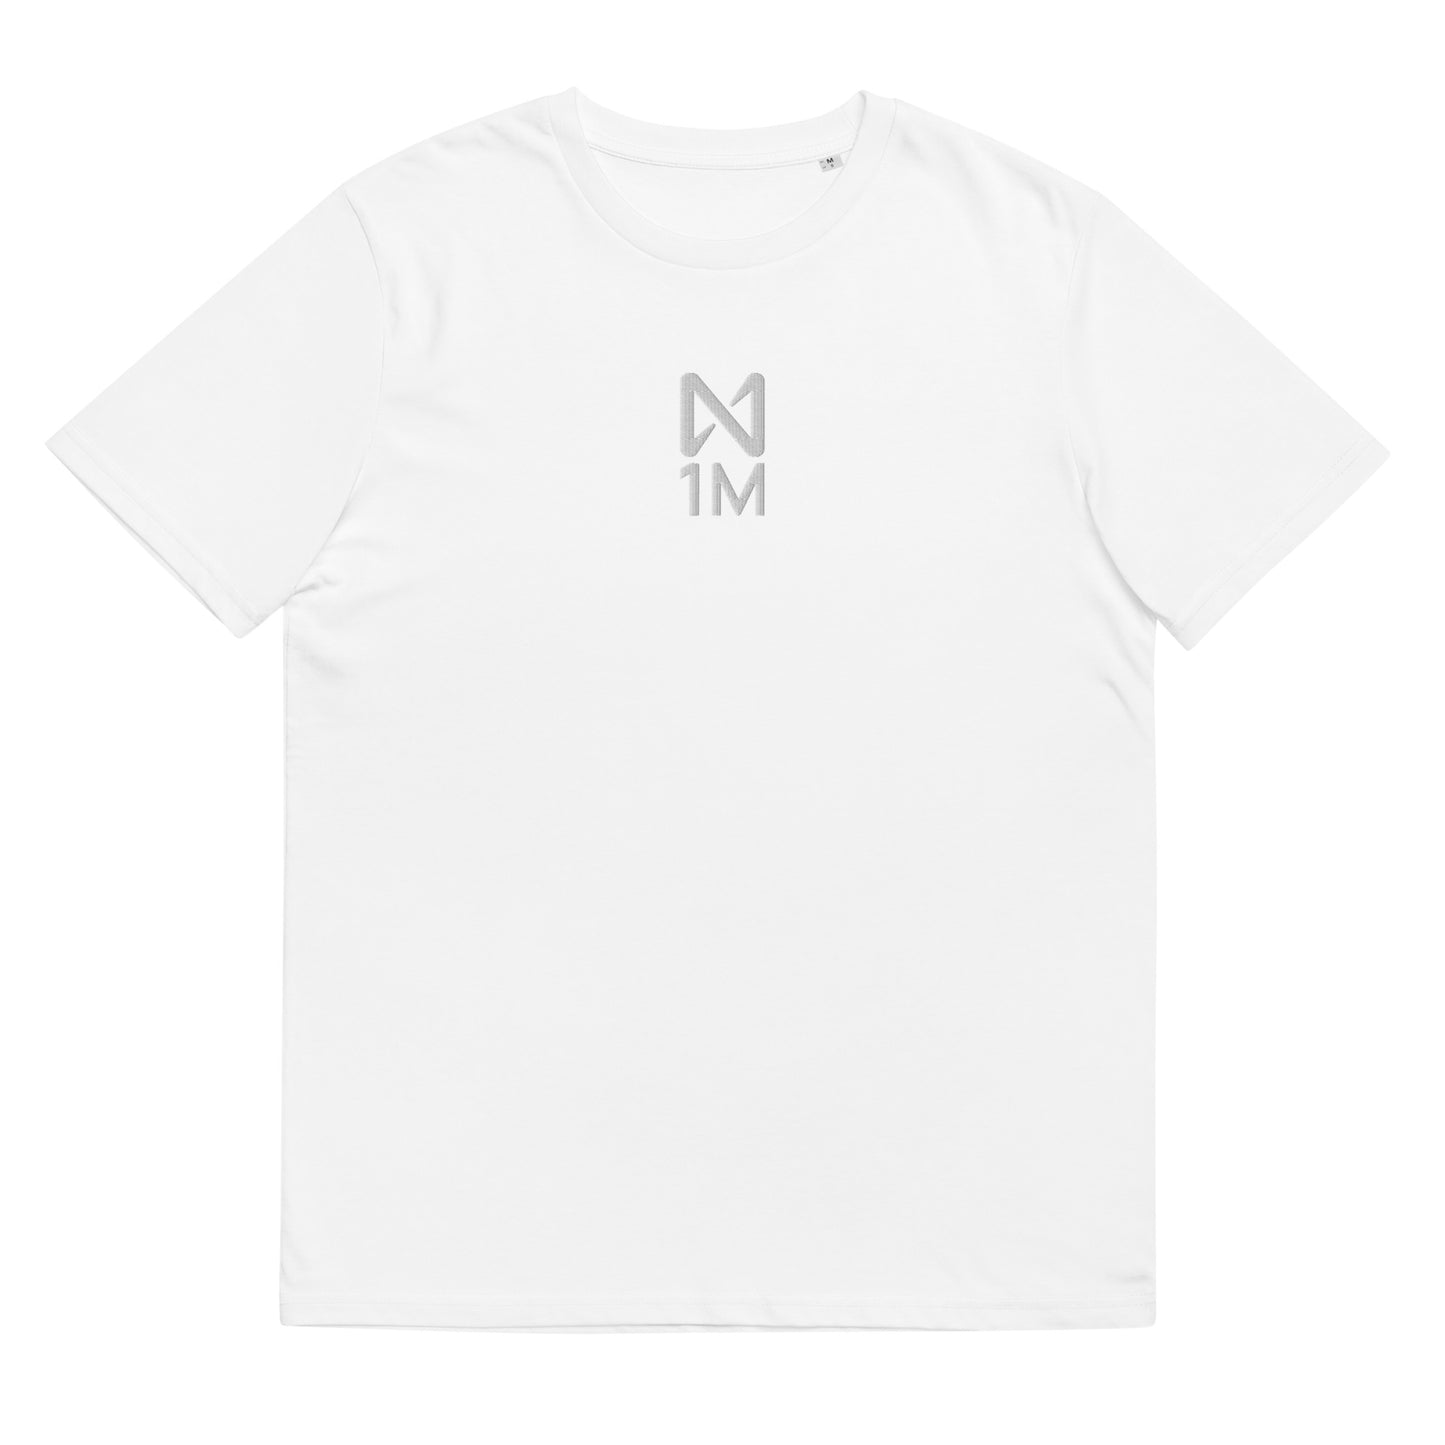 NEAR 1M—Embroidered T-shirt